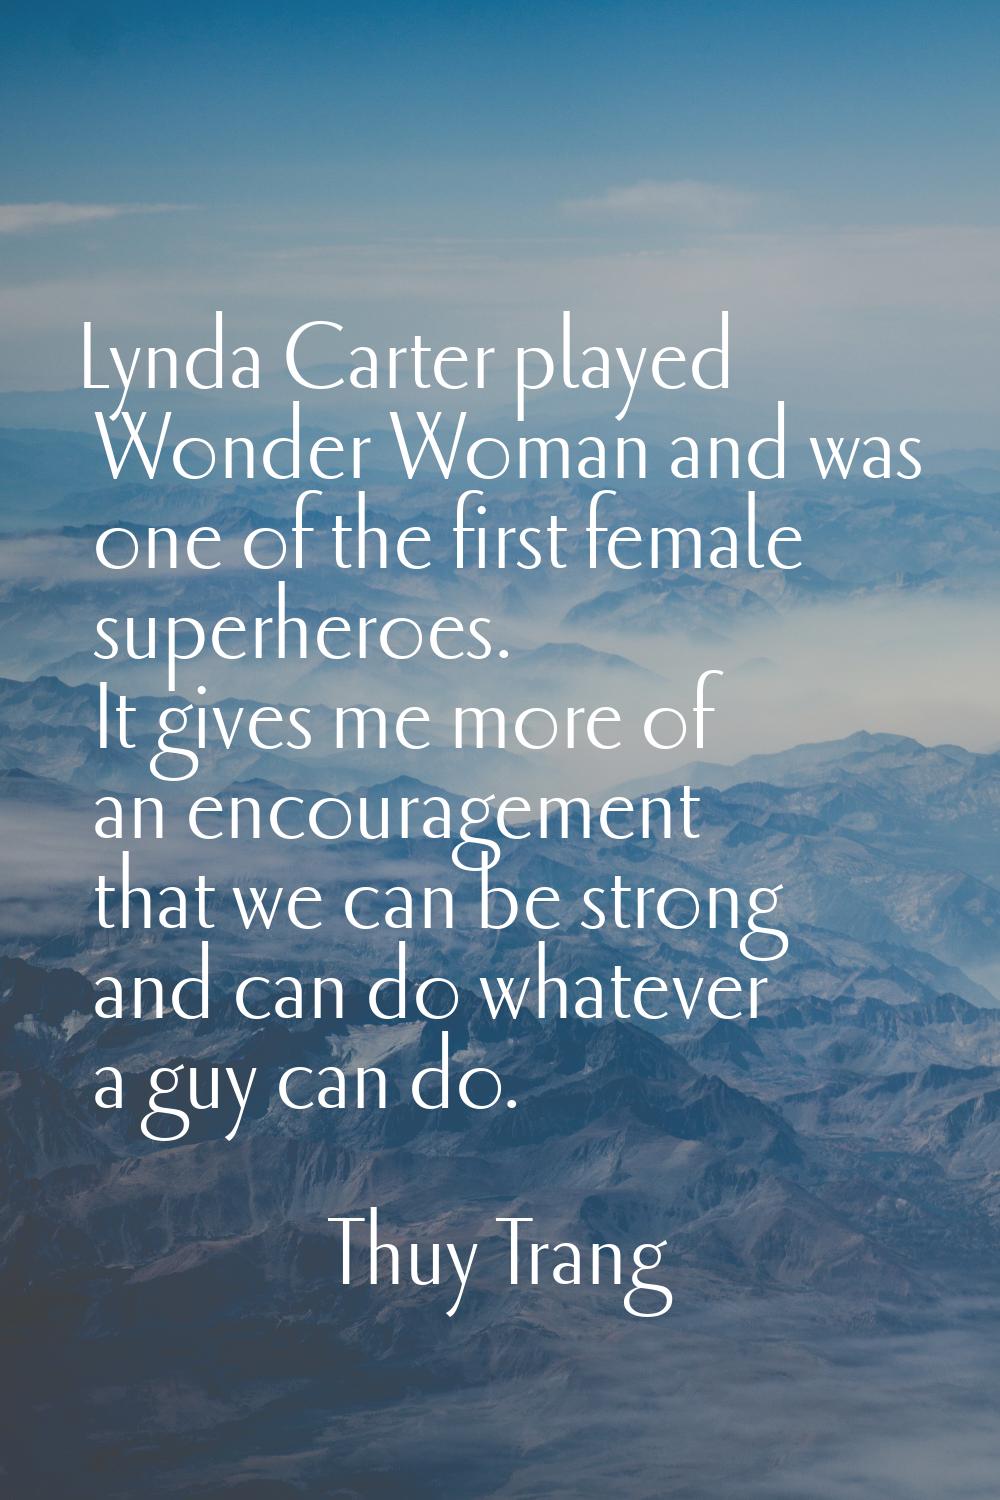 Lynda Carter played Wonder Woman and was one of the first female superheroes. It gives me more of a